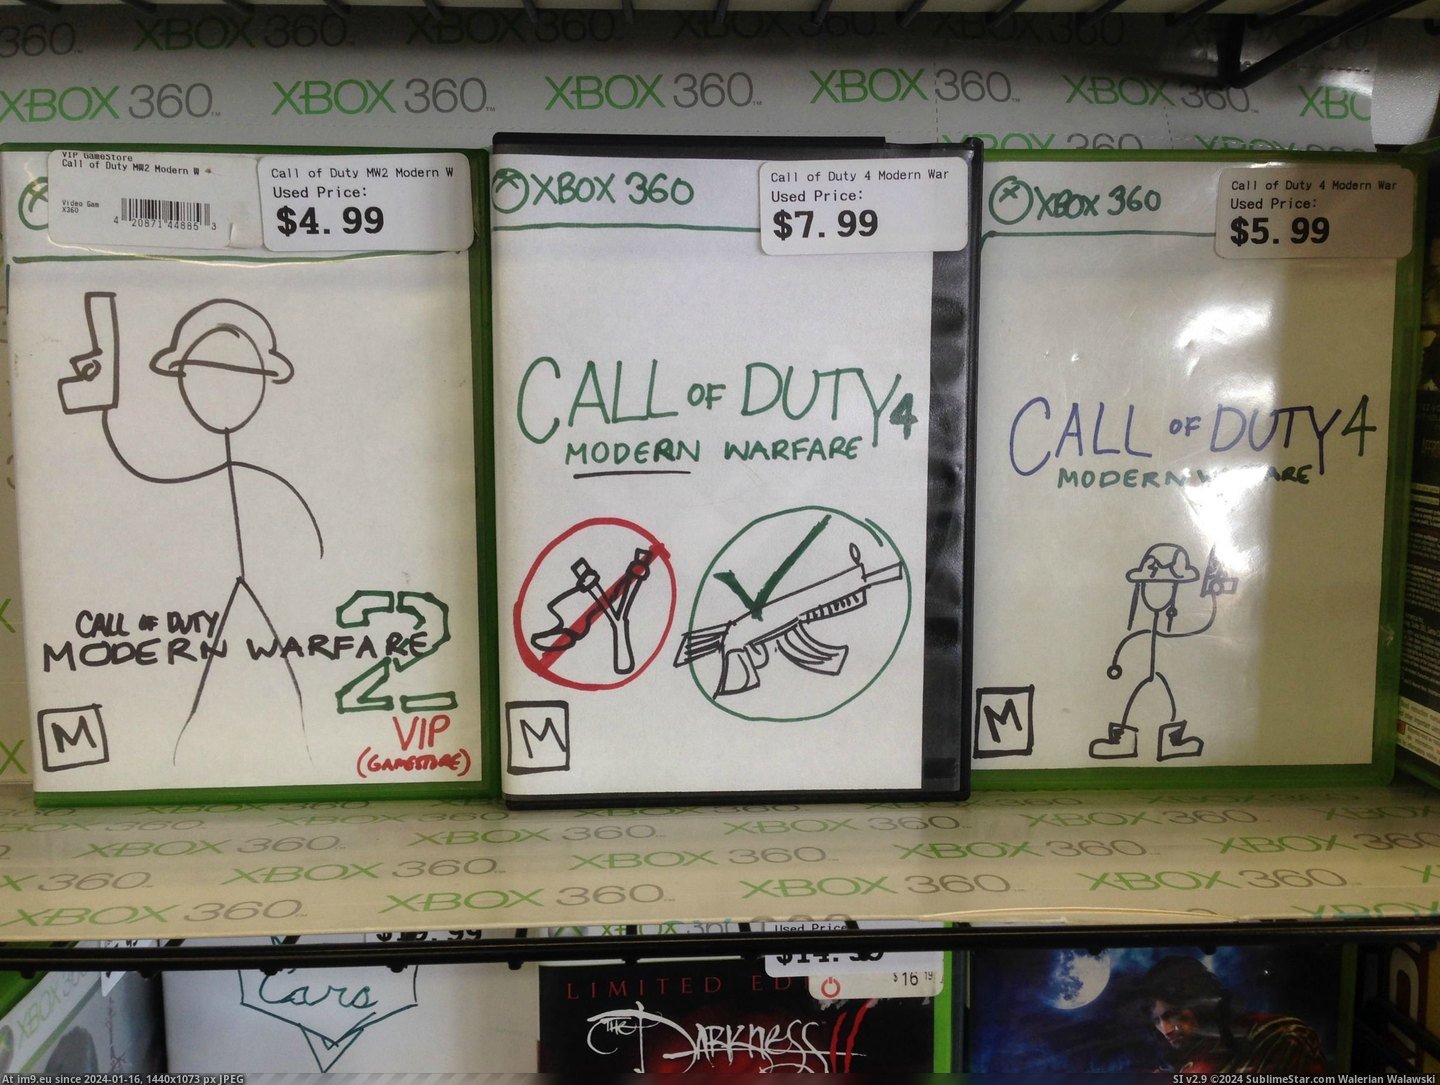 #Gaming #For #Art #Covers #Skills #Lacks #Game #Local #Store [Gaming] What my local game store lacks in game covers, it makes up for in art skills. 3 Pic. (Изображение из альбом My r/GAMING favs))